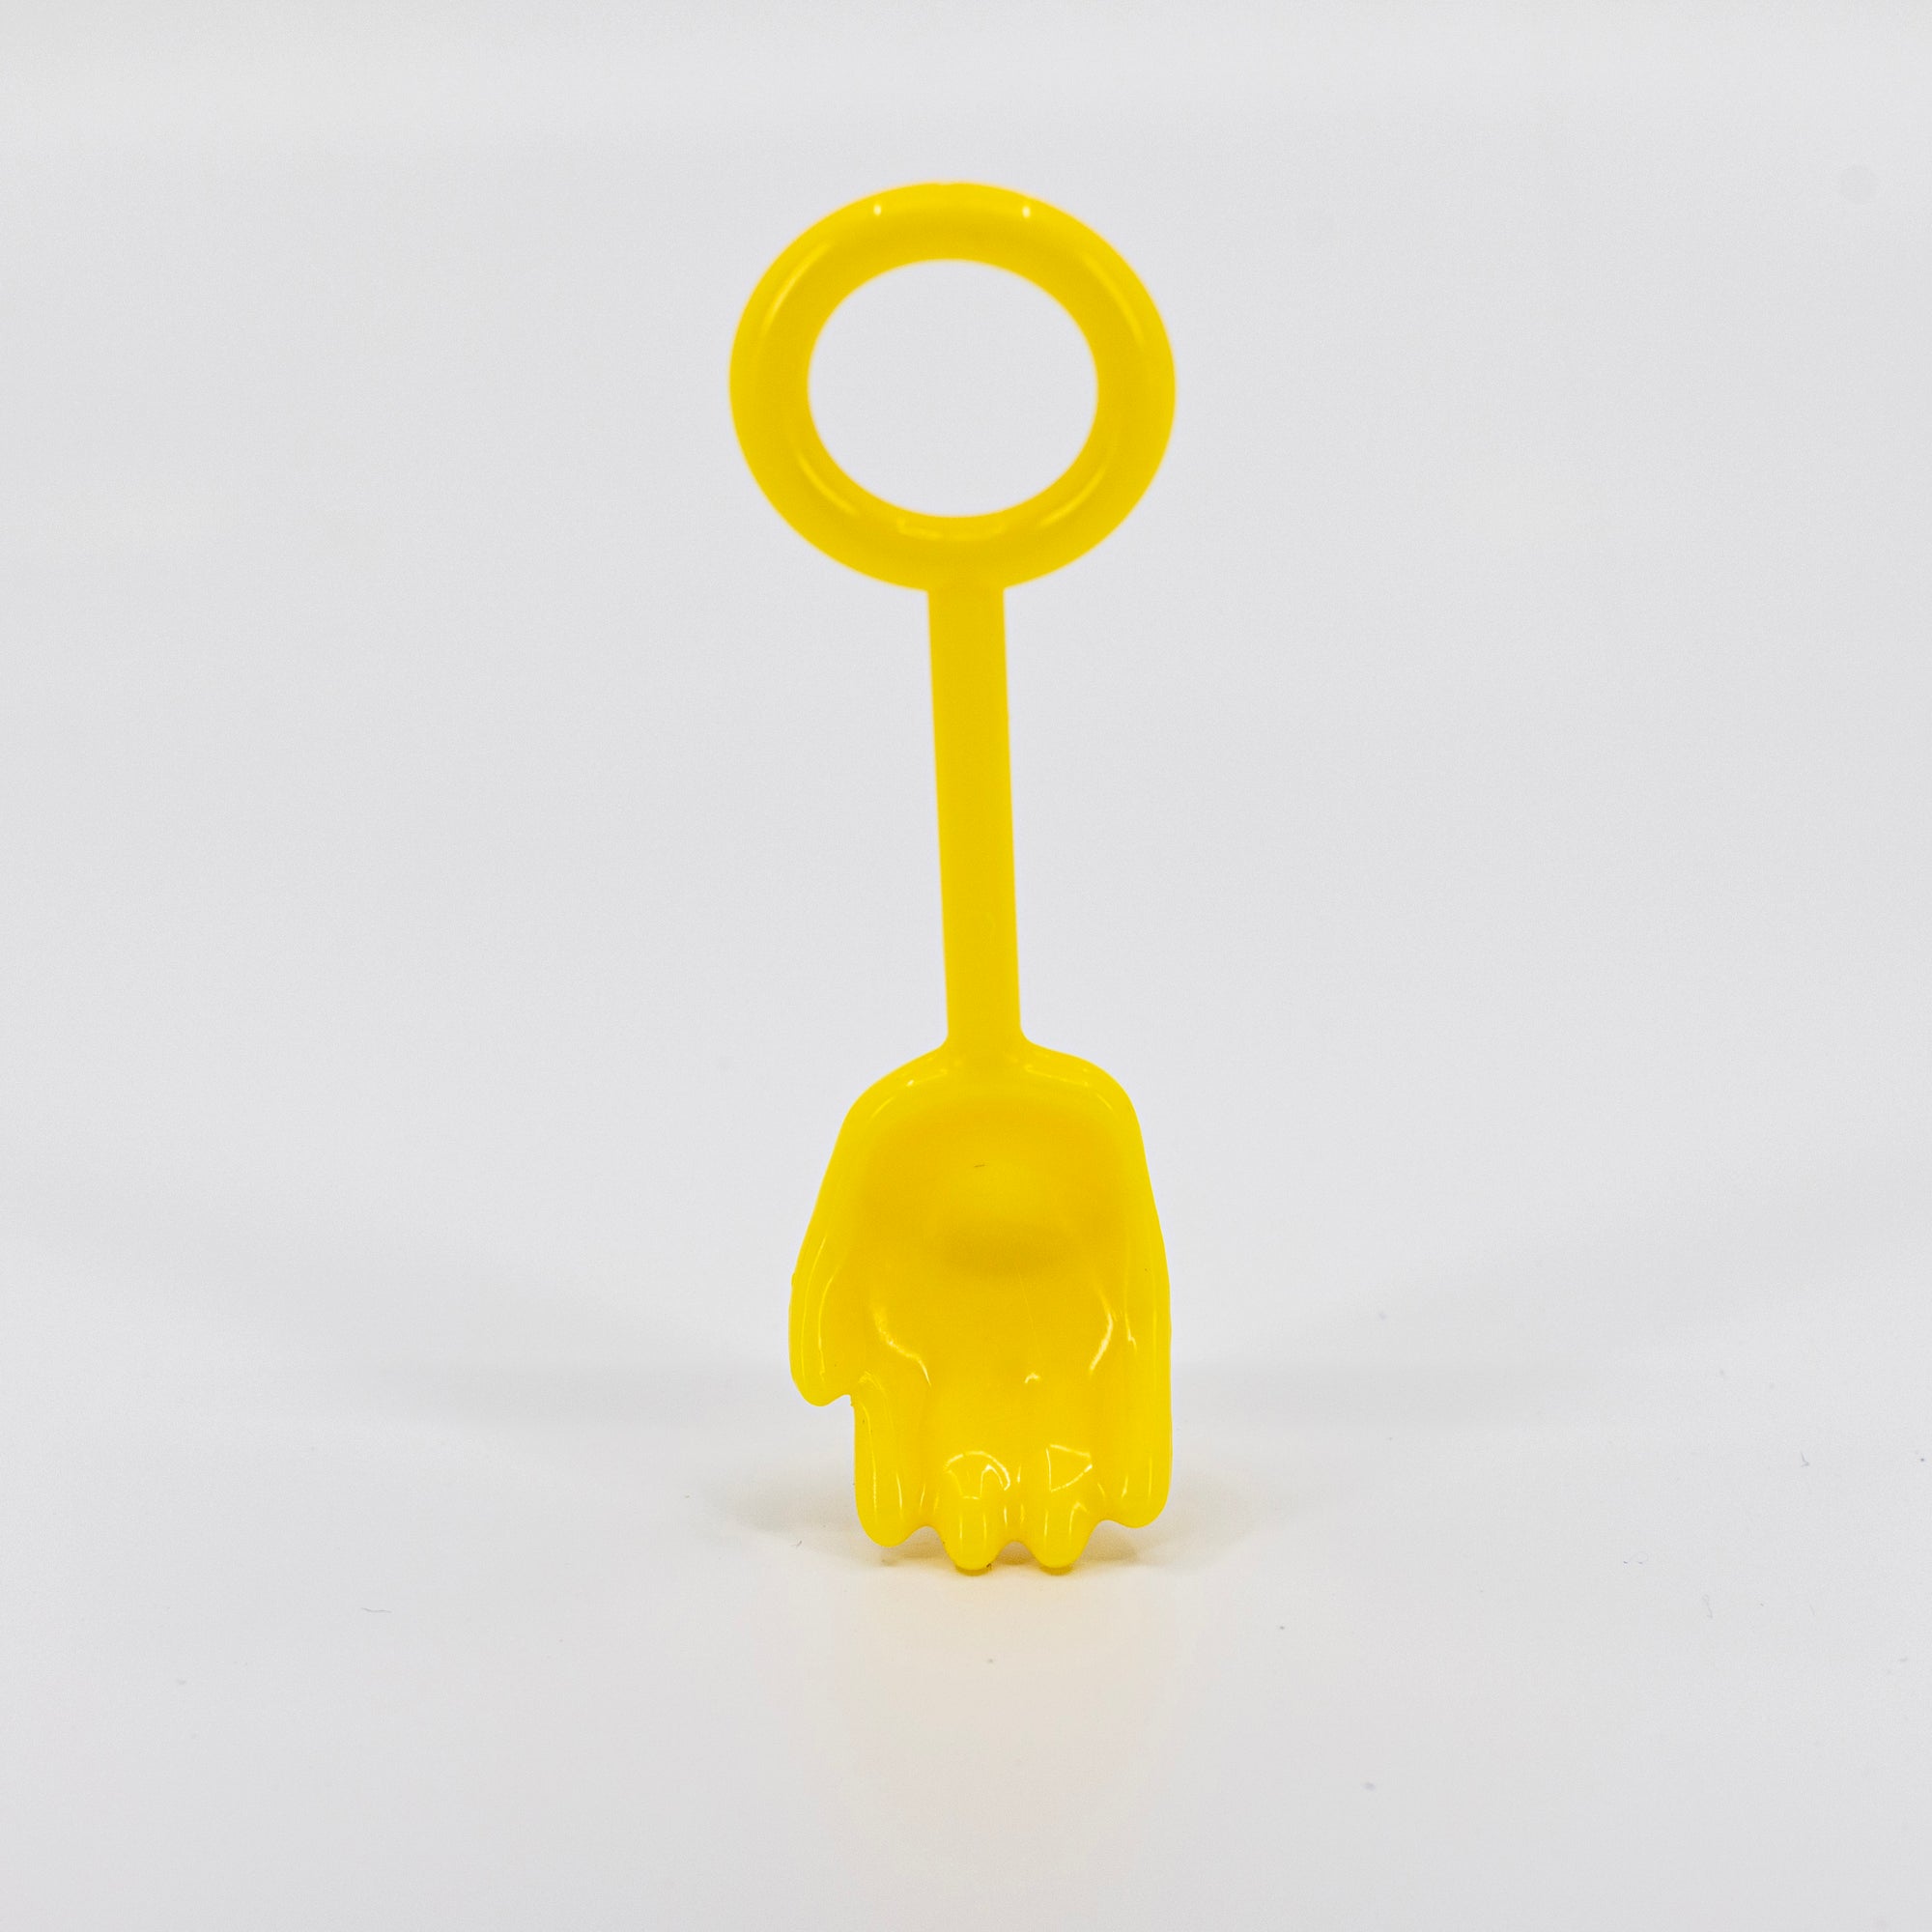 Adorable yellow Handy Spoon is great for dispensing SPLATZ soap balls and blowing bubbles